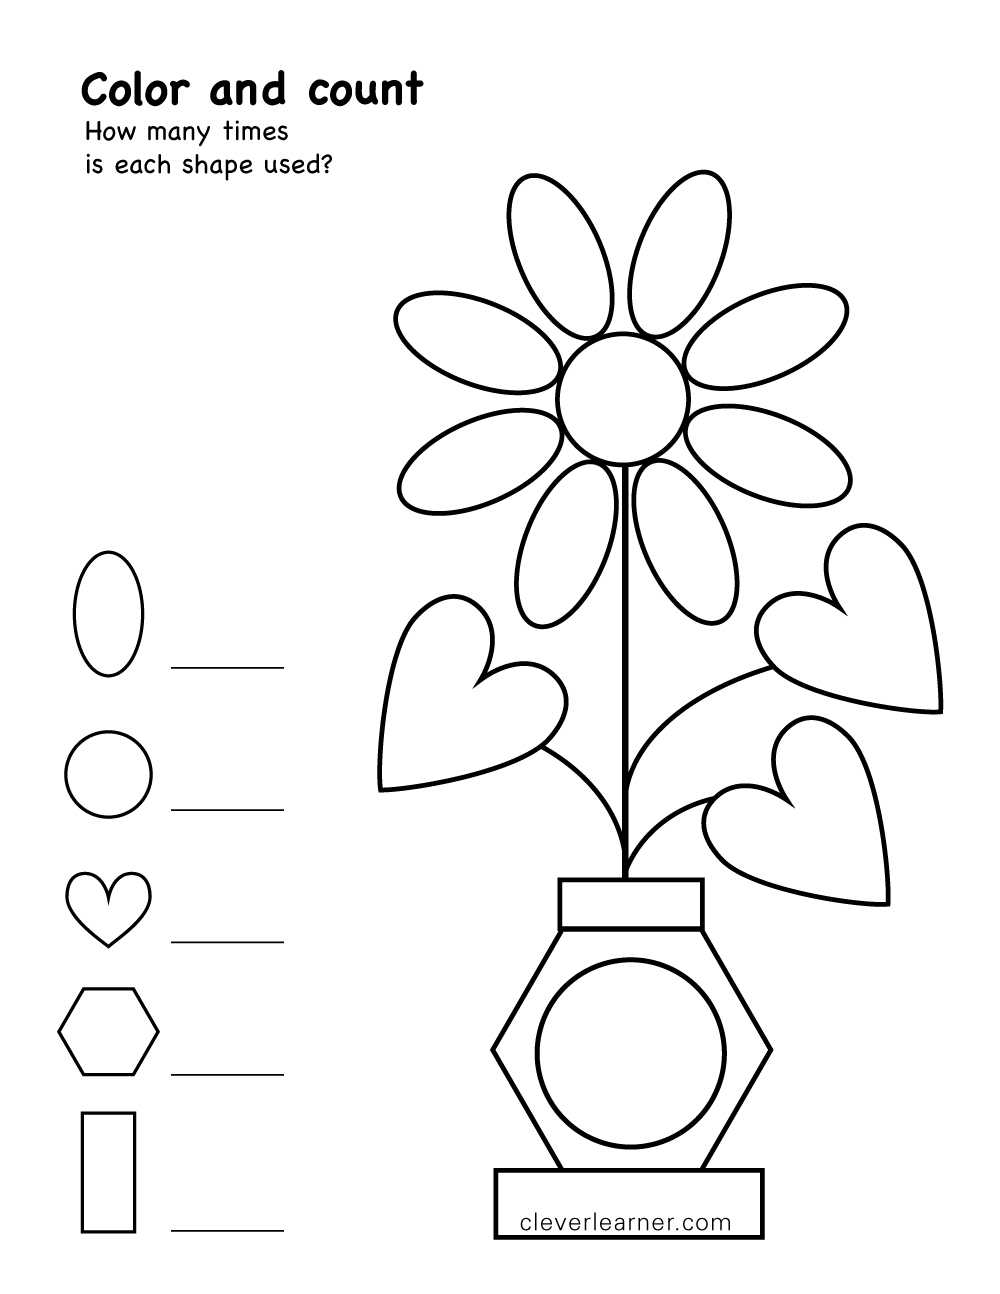 Colors Worksheets for Preschoolers Free Printables Along with Color Matching Pages Coloring Pages